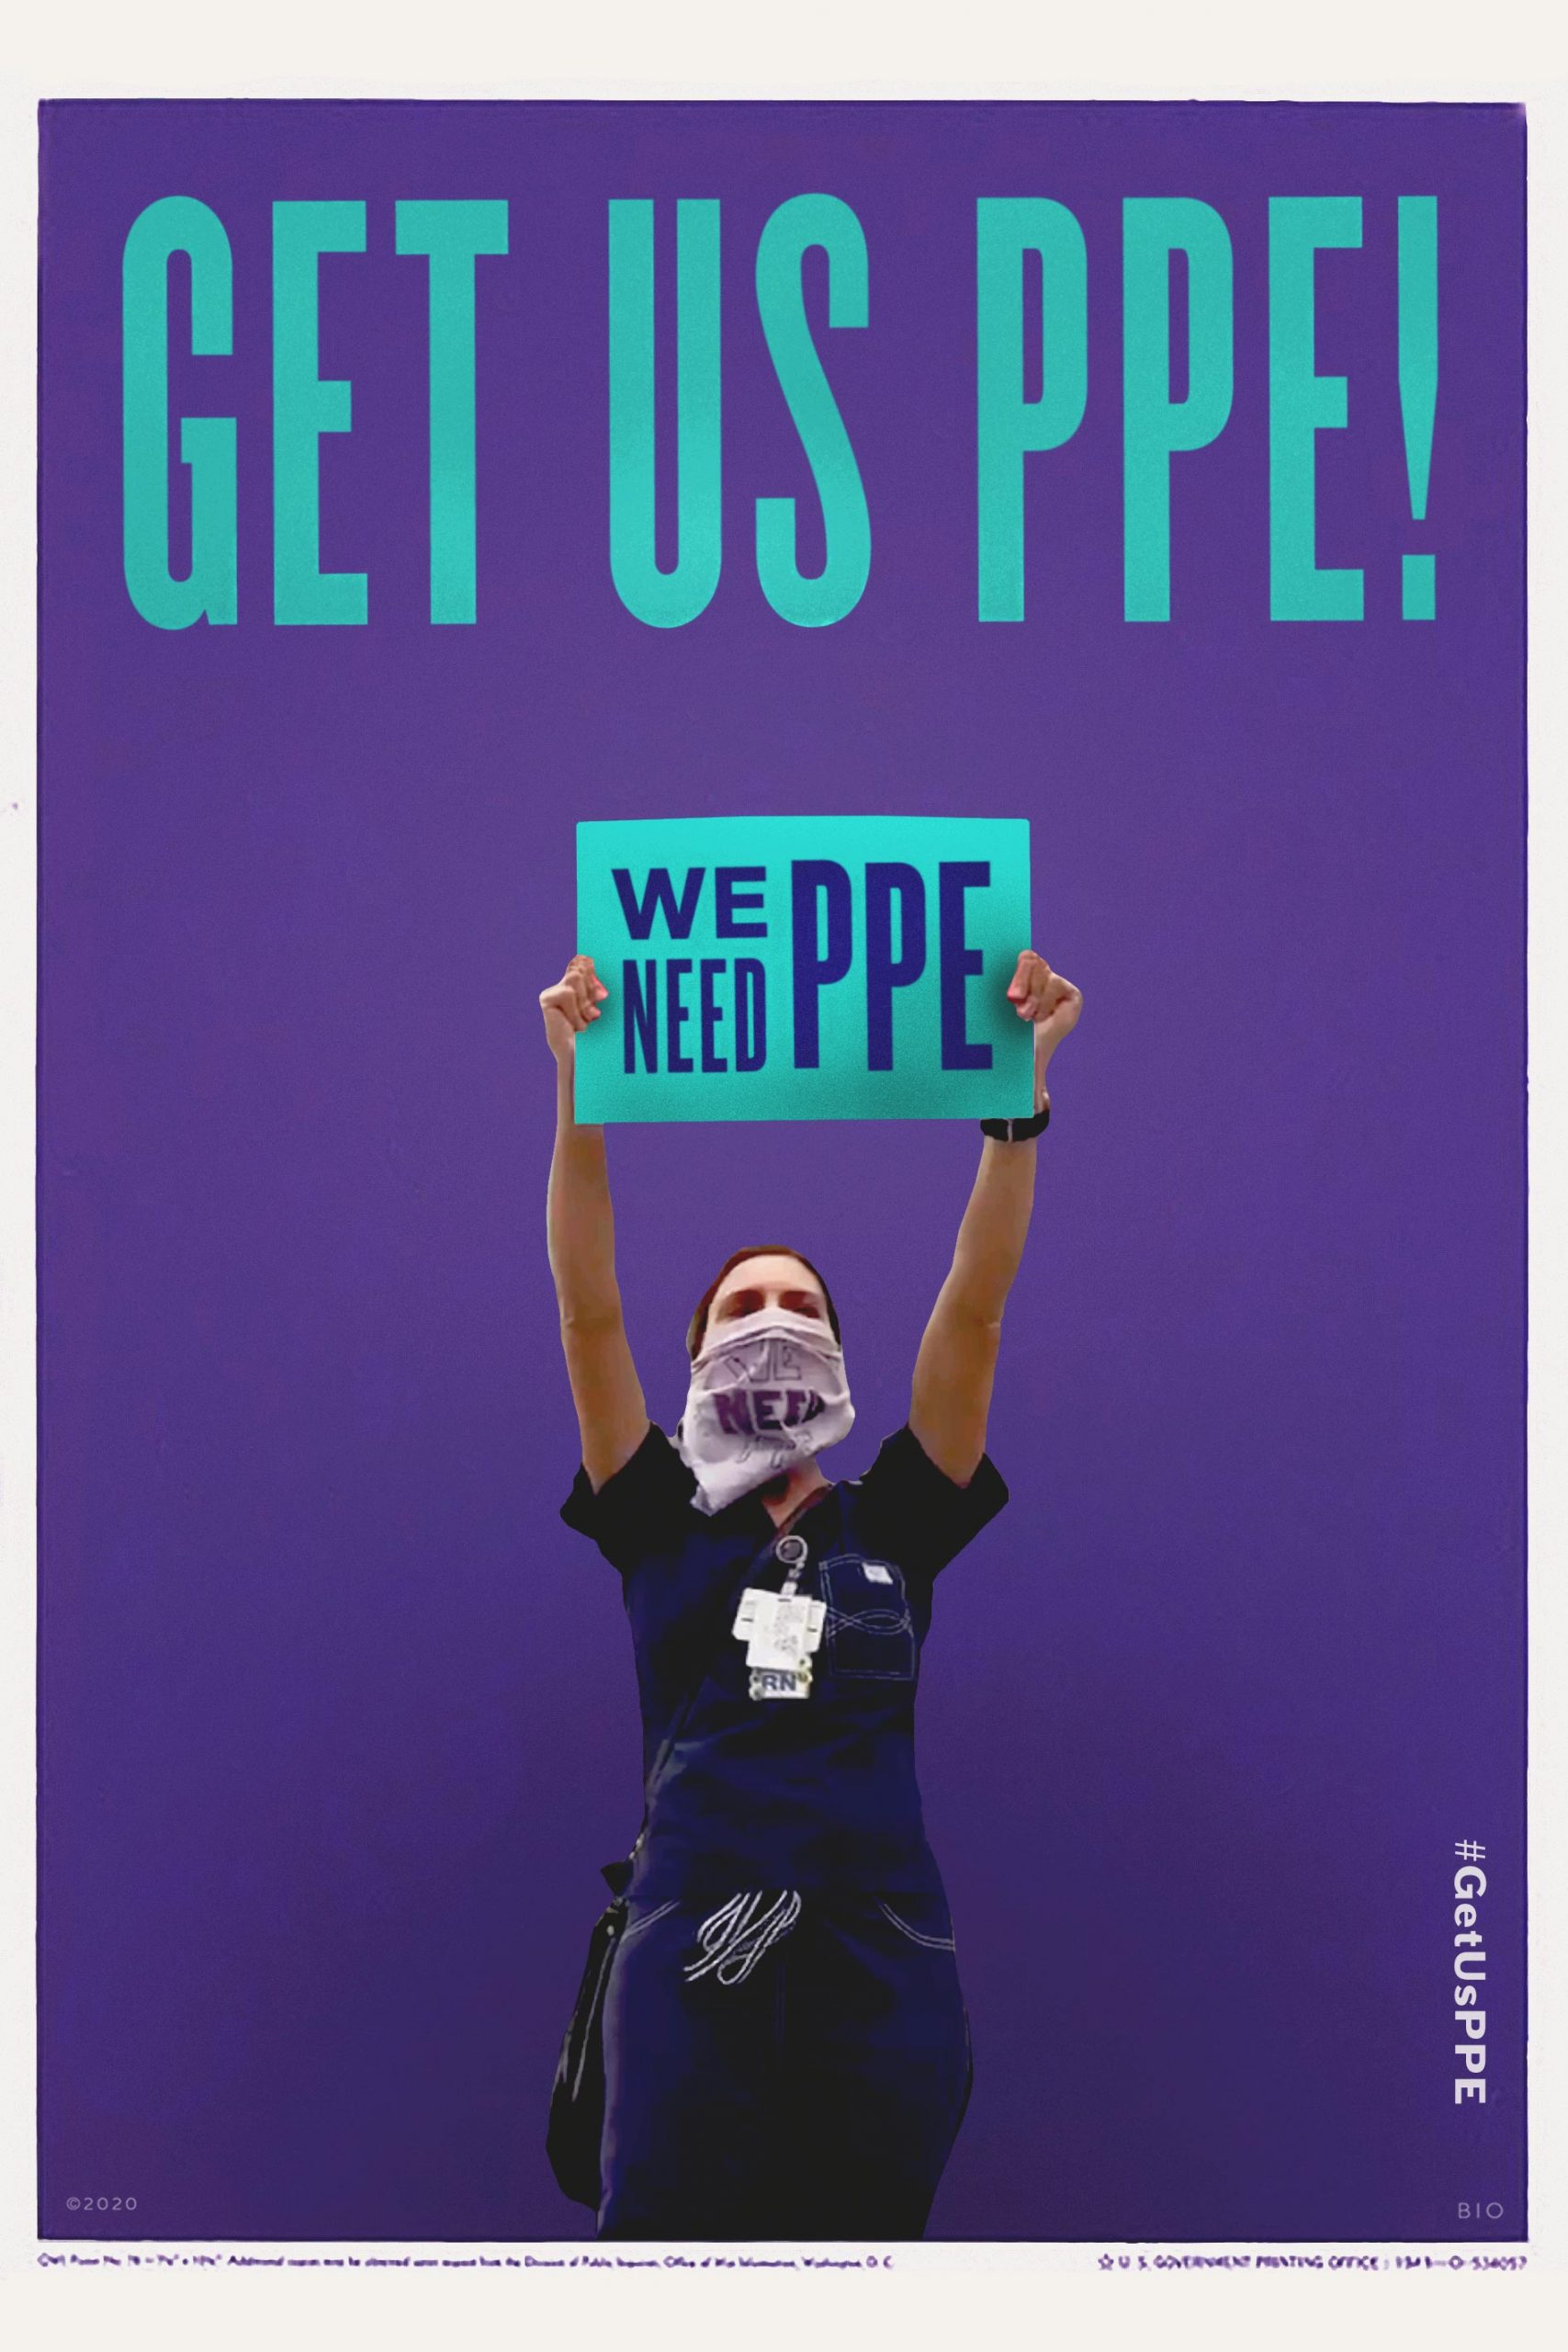 GET US PPE!